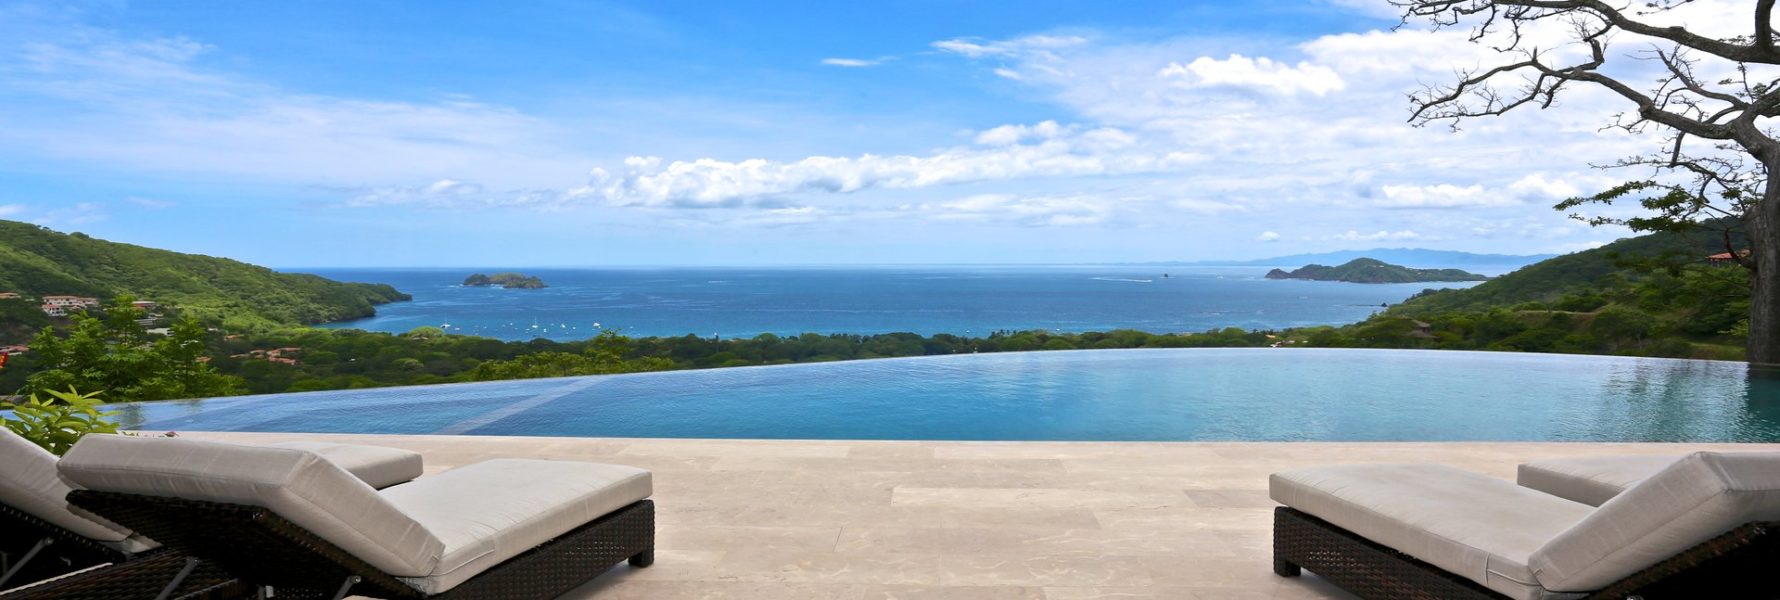 Your vacation in Guanacaste will be filled with views like this. The hotel sized infinity pool blends right into Hermosa Bay. 